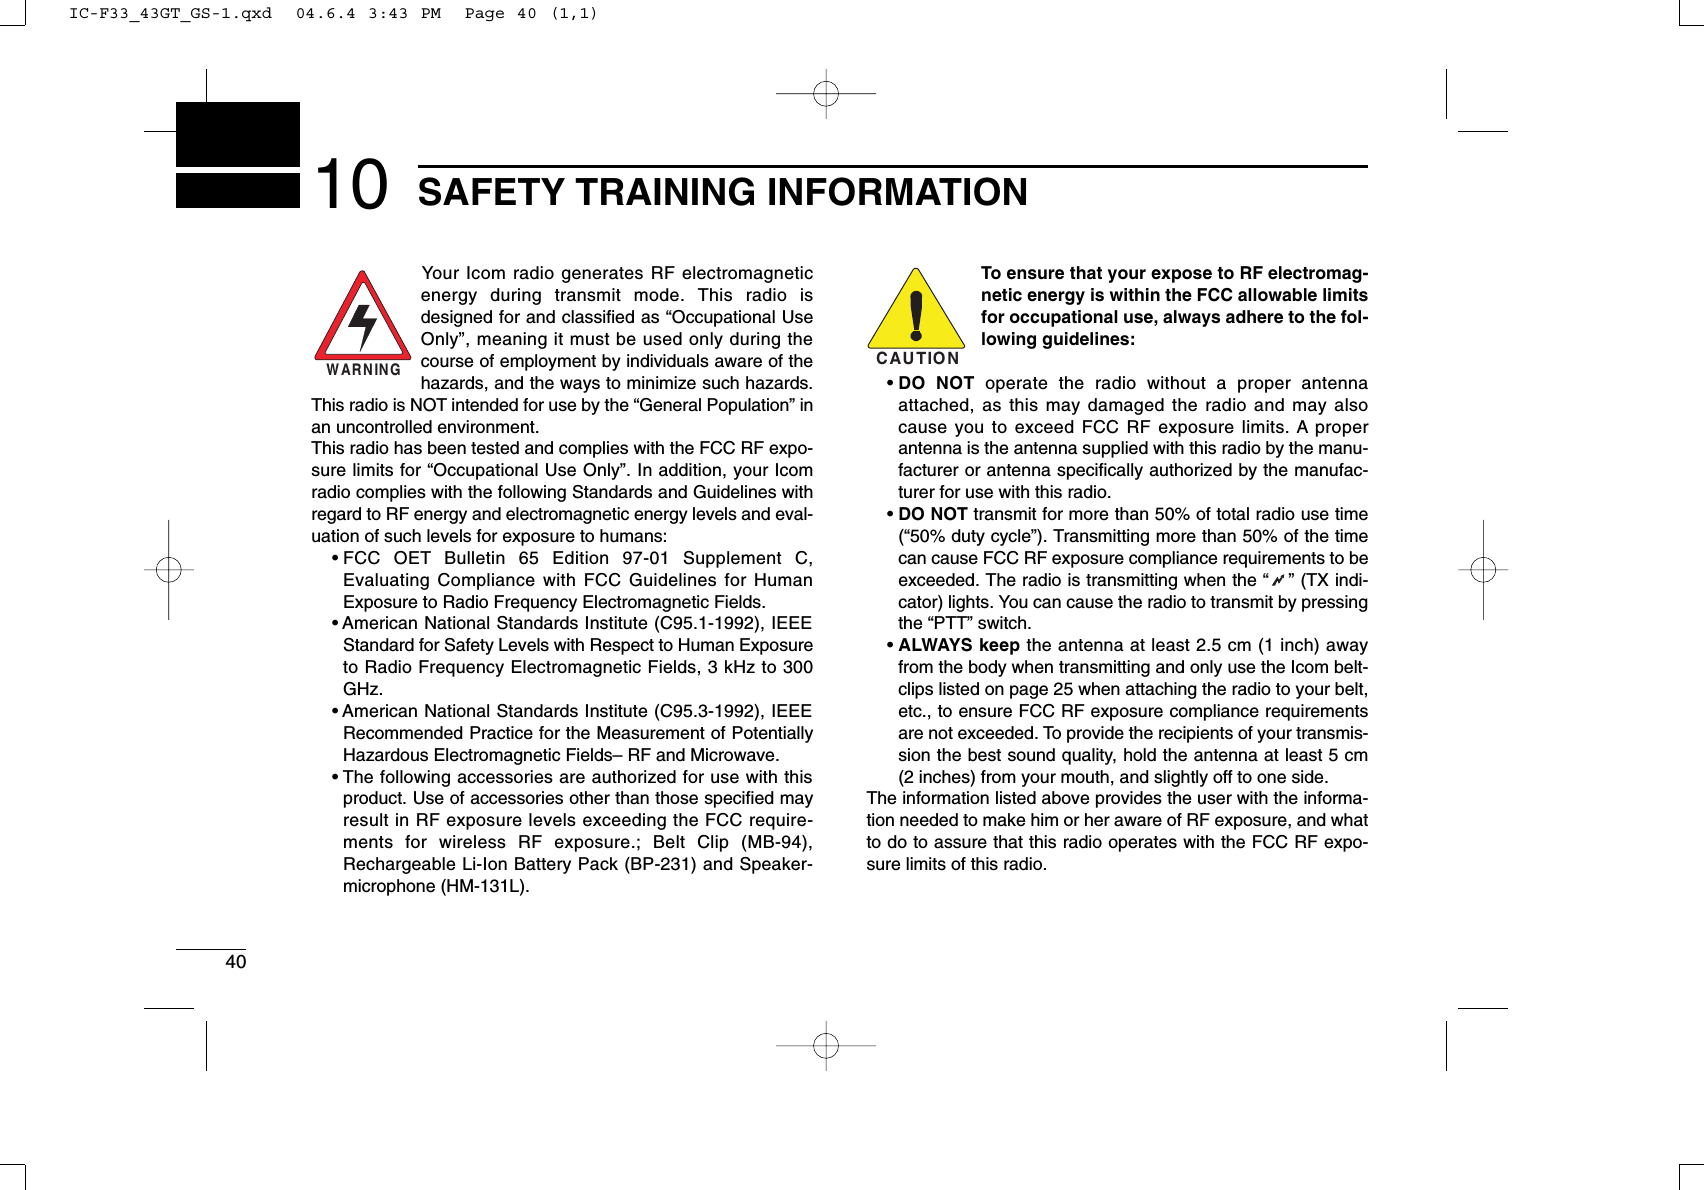 4010 SAFETY TRAINING INFORMATIONYour Icom radio generates RF electromagneticenergy during transmit mode. This radio isdesigned for and classiﬁed as “Occupational UseOnly”, meaning it must be used only during thecourse of employment by individuals aware of thehazards, and the ways to minimize such hazards.This radio is NOT intended for use by the “General Population” inan uncontrolled environment.This radio has been tested and complies with the FCC RF expo-sure limits for “Occupational Use Only”. In addition, your Icomradio complies with the following Standards and Guidelines withregard to RF energy and electromagnetic energy levels and eval-uation of such levels for exposure to humans:• FCC OET Bulletin 65 Edition 97-01 Supplement C,Evaluating Compliance with FCC Guidelines for HumanExposure to Radio Frequency Electromagnetic Fields.• American National Standards Institute (C95.1-1992), IEEEStandard for Safety Levels with Respect to Human Exposureto Radio Frequency Electromagnetic Fields, 3 kHz to 300GHz.• American National Standards Institute (C95.3-1992), IEEERecommended Practice for the Measurement of PotentiallyHazardous Electromagnetic Fields– RF and Microwave.• The following accessories are authorized for use with thisproduct. Use of accessories other than those speciﬁed mayresult in RF exposure levels exceeding the FCC require-ments for wireless RF exposure.; Belt Clip (MB-94),Rechargeable Li-Ion Battery Pack (BP-231) and Speaker-microphone (HM-131L).To ensure that your expose to RF electromag-netic energy is within the FCC allowable limitsfor occupational use, always adhere to the fol-lowing guidelines:• DO NOT operate the radio without a proper antennaattached, as this may damaged the radio and may alsocause you to exceed FCC RF exposure limits. A properantenna is the antenna supplied with this radio by the manu-facturer or antenna speciﬁcally authorized by the manufac-turer for use with this radio.• DO NOT transmit for more than 50% of total radio use time(“50% duty cycle”). Transmitting more than 50% of the timecan cause FCC RF exposure compliance requirements to beexceeded. The radio is transmitting when the “” (TX indi-cator) lights. You can cause the radio to transmit by pressingthe “PTT” switch.• ALWAYS keep the antenna at least 2.5 cm (1 inch) awayfrom the body when transmitting and only use the Icom belt-clips listed on page 25 when attaching the radio to your belt,etc., to ensure FCC RF exposure compliance requirementsare not exceeded. To provide the recipients of your transmis-sion the best sound quality, hold the antenna at least 5 cm(2 inches) from your mouth, and slightly off to one side.The information listed above provides the user with the informa-tion needed to make him or her aware of RF exposure, and whatto do to assure that this radio operates with the FCC RF expo-sure limits of this radio.CAUTIONWARNINGIC-F33_43GT_GS-1.qxd  04.6.4 3:43 PM  Page 40 (1,1)